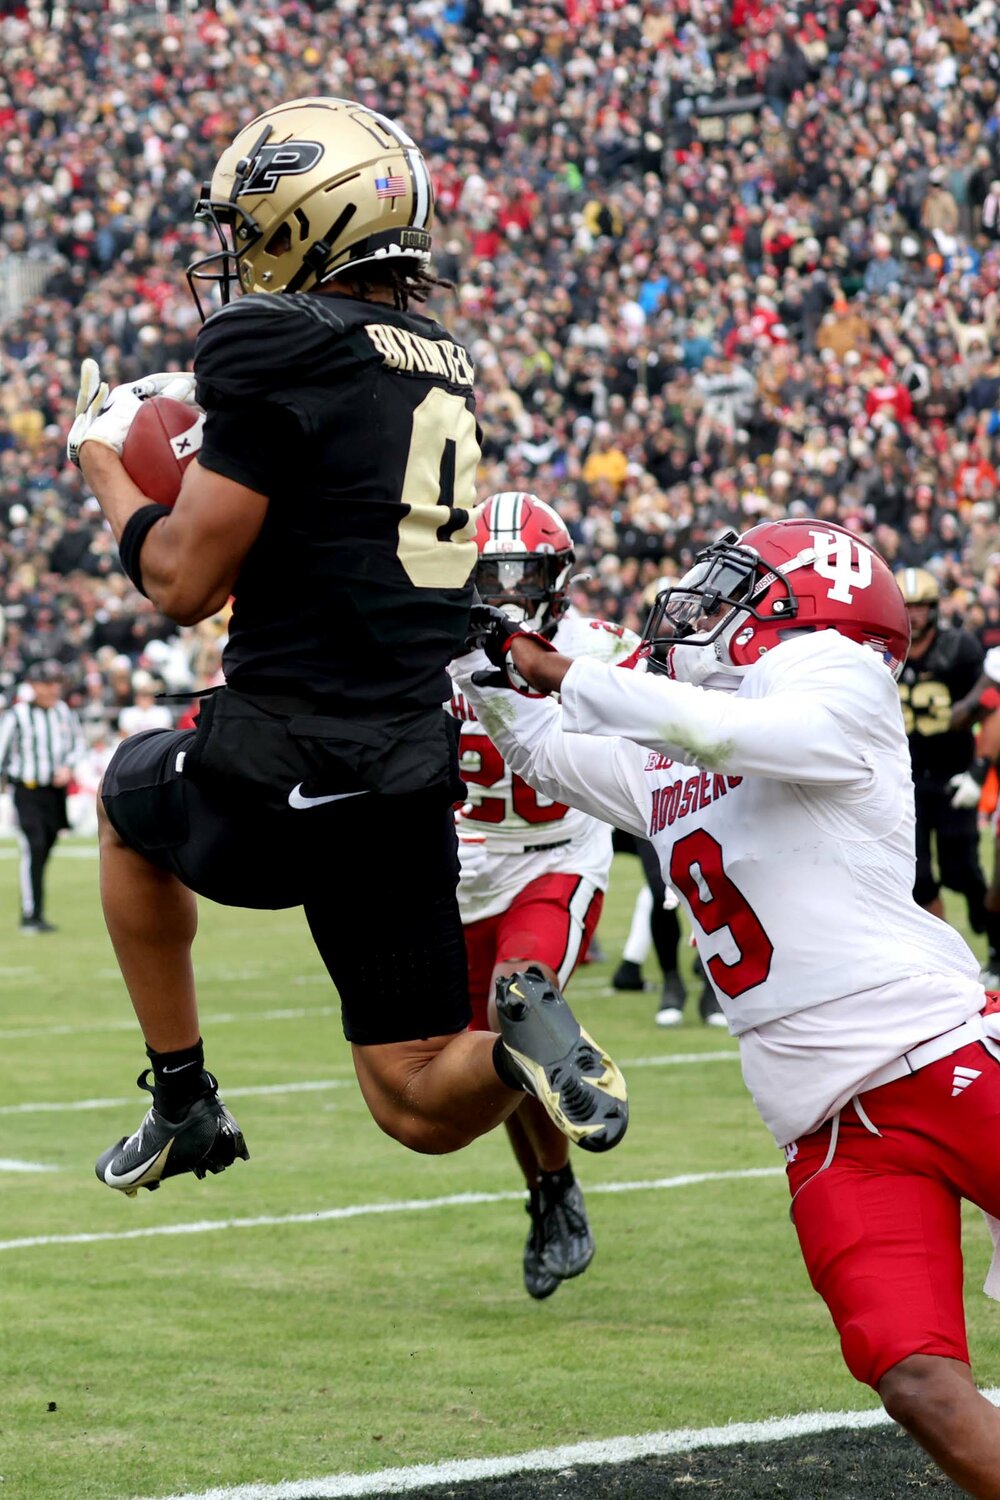 Jamier Johnson of Indiana - driving Jayden Dixon-Veal of Purdue out of bounds for an incompletion